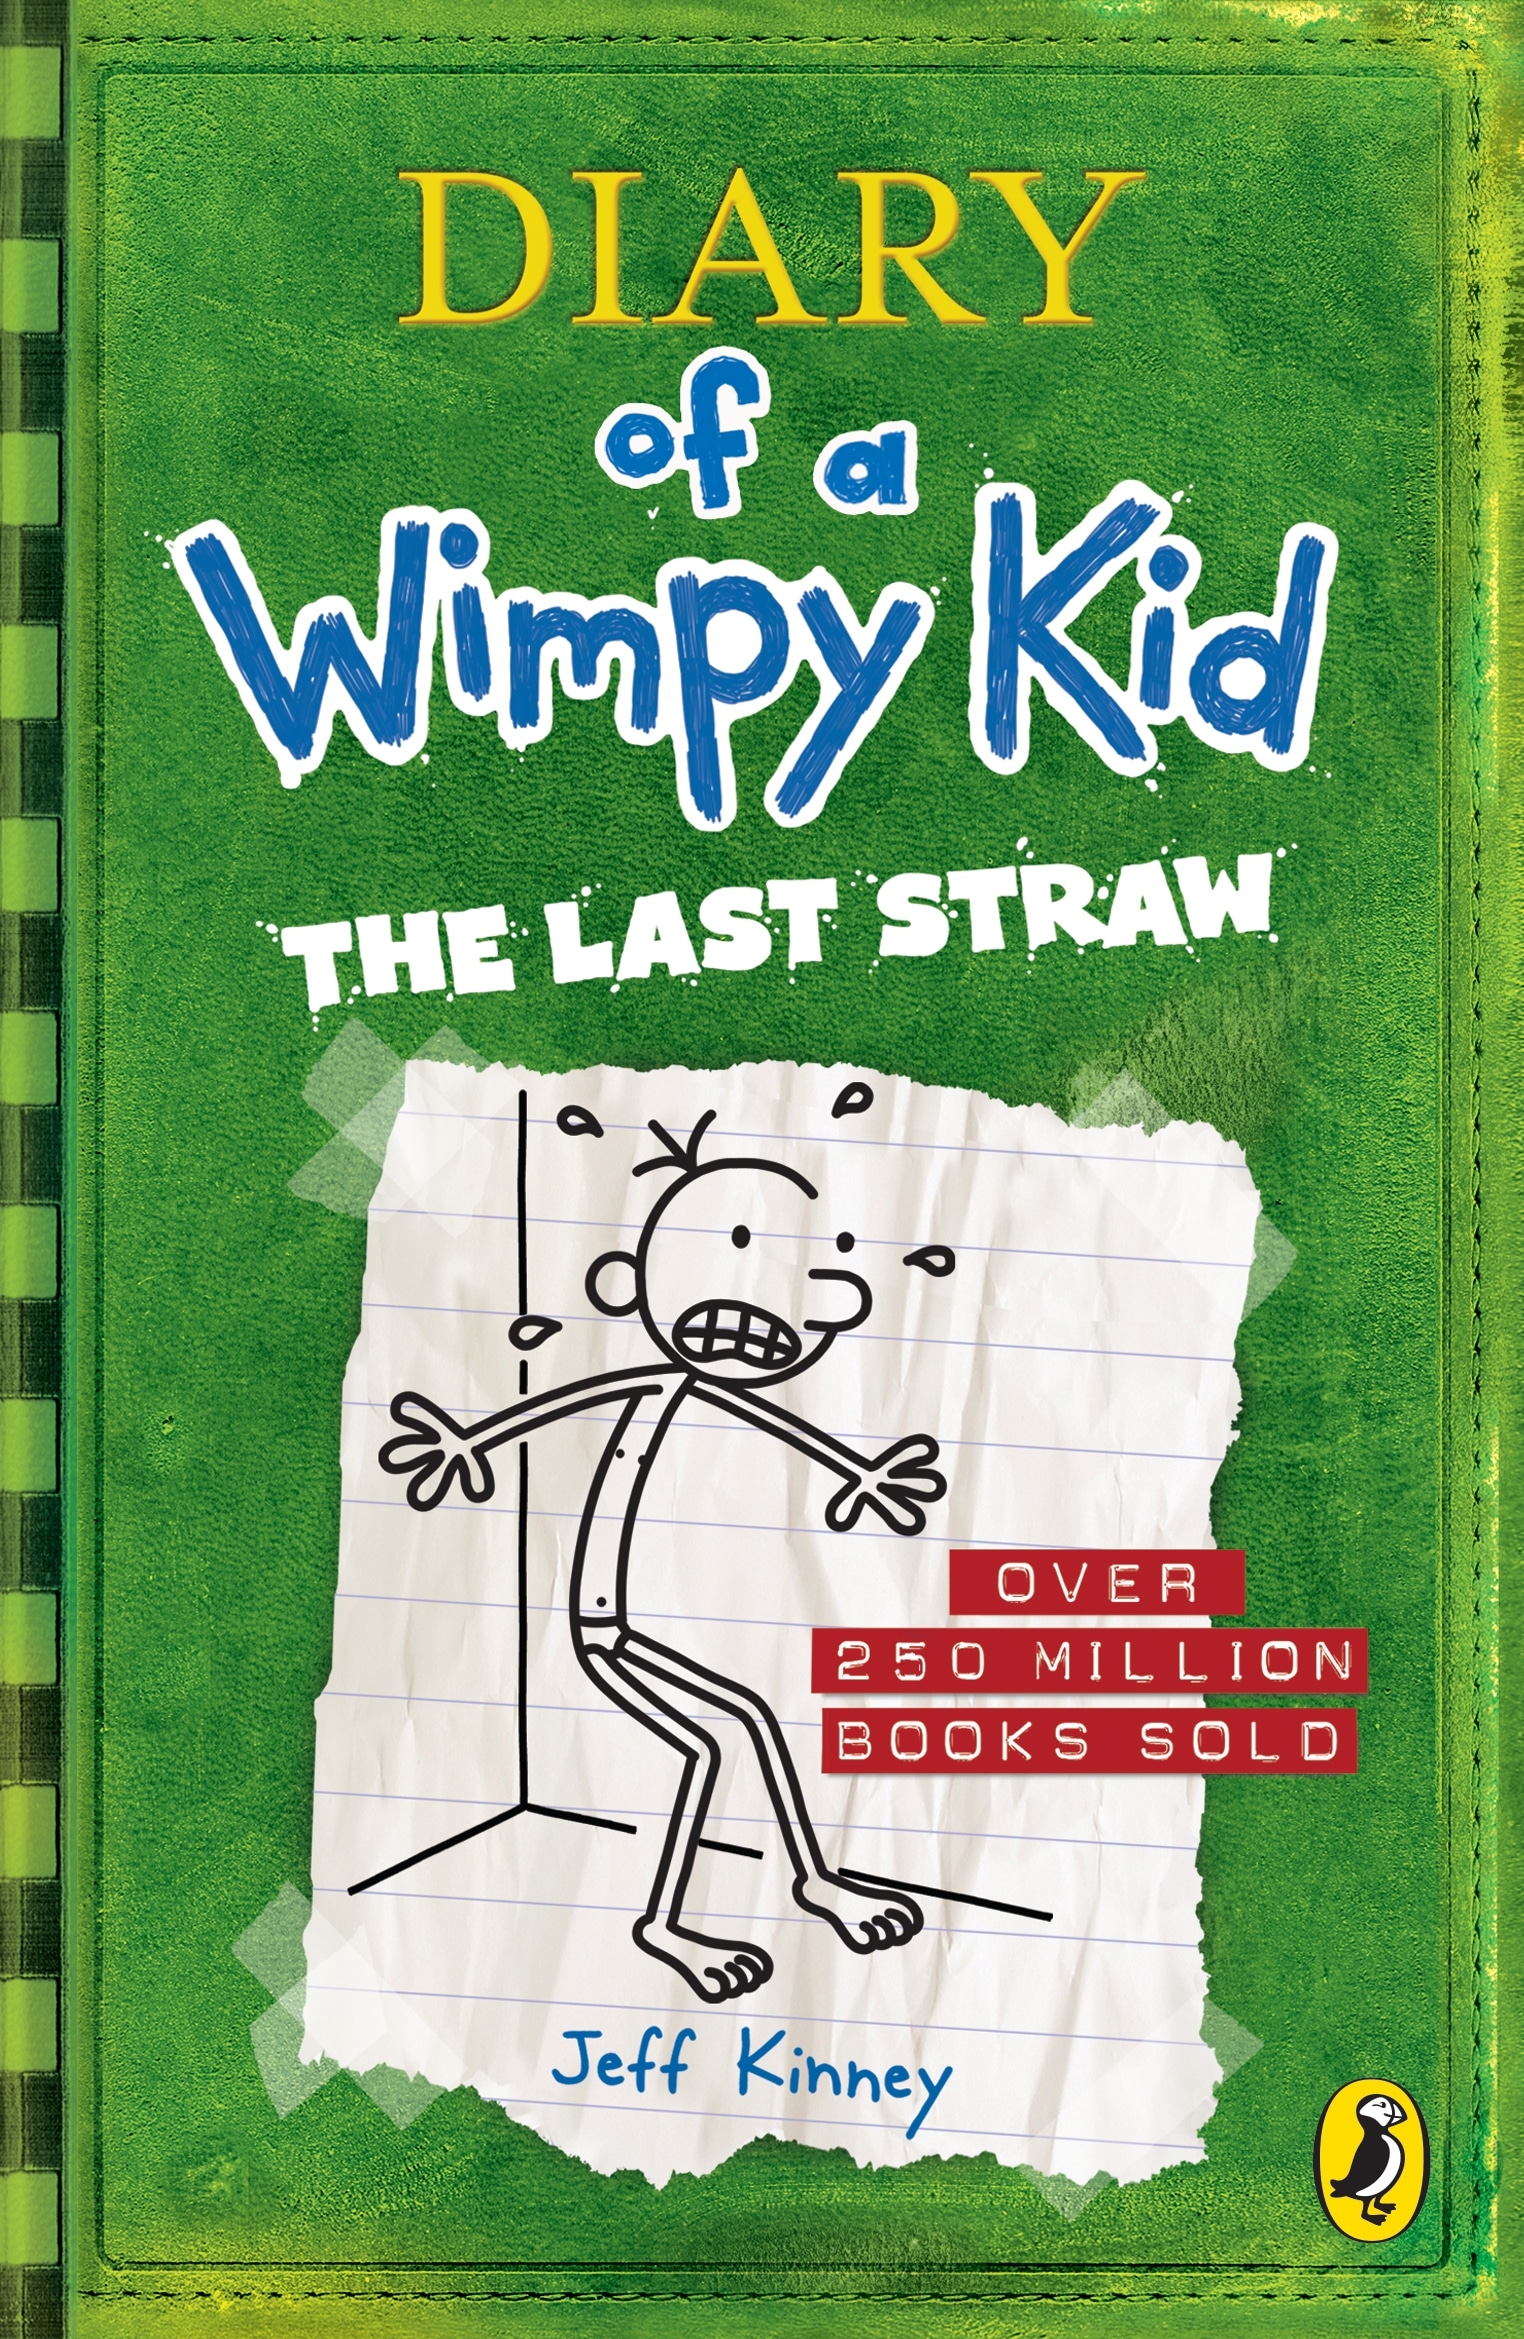 Book “Diary of a Wimpy Kid: The Last Straw (Book 3)” by Jeff Kinney — August 6, 2009